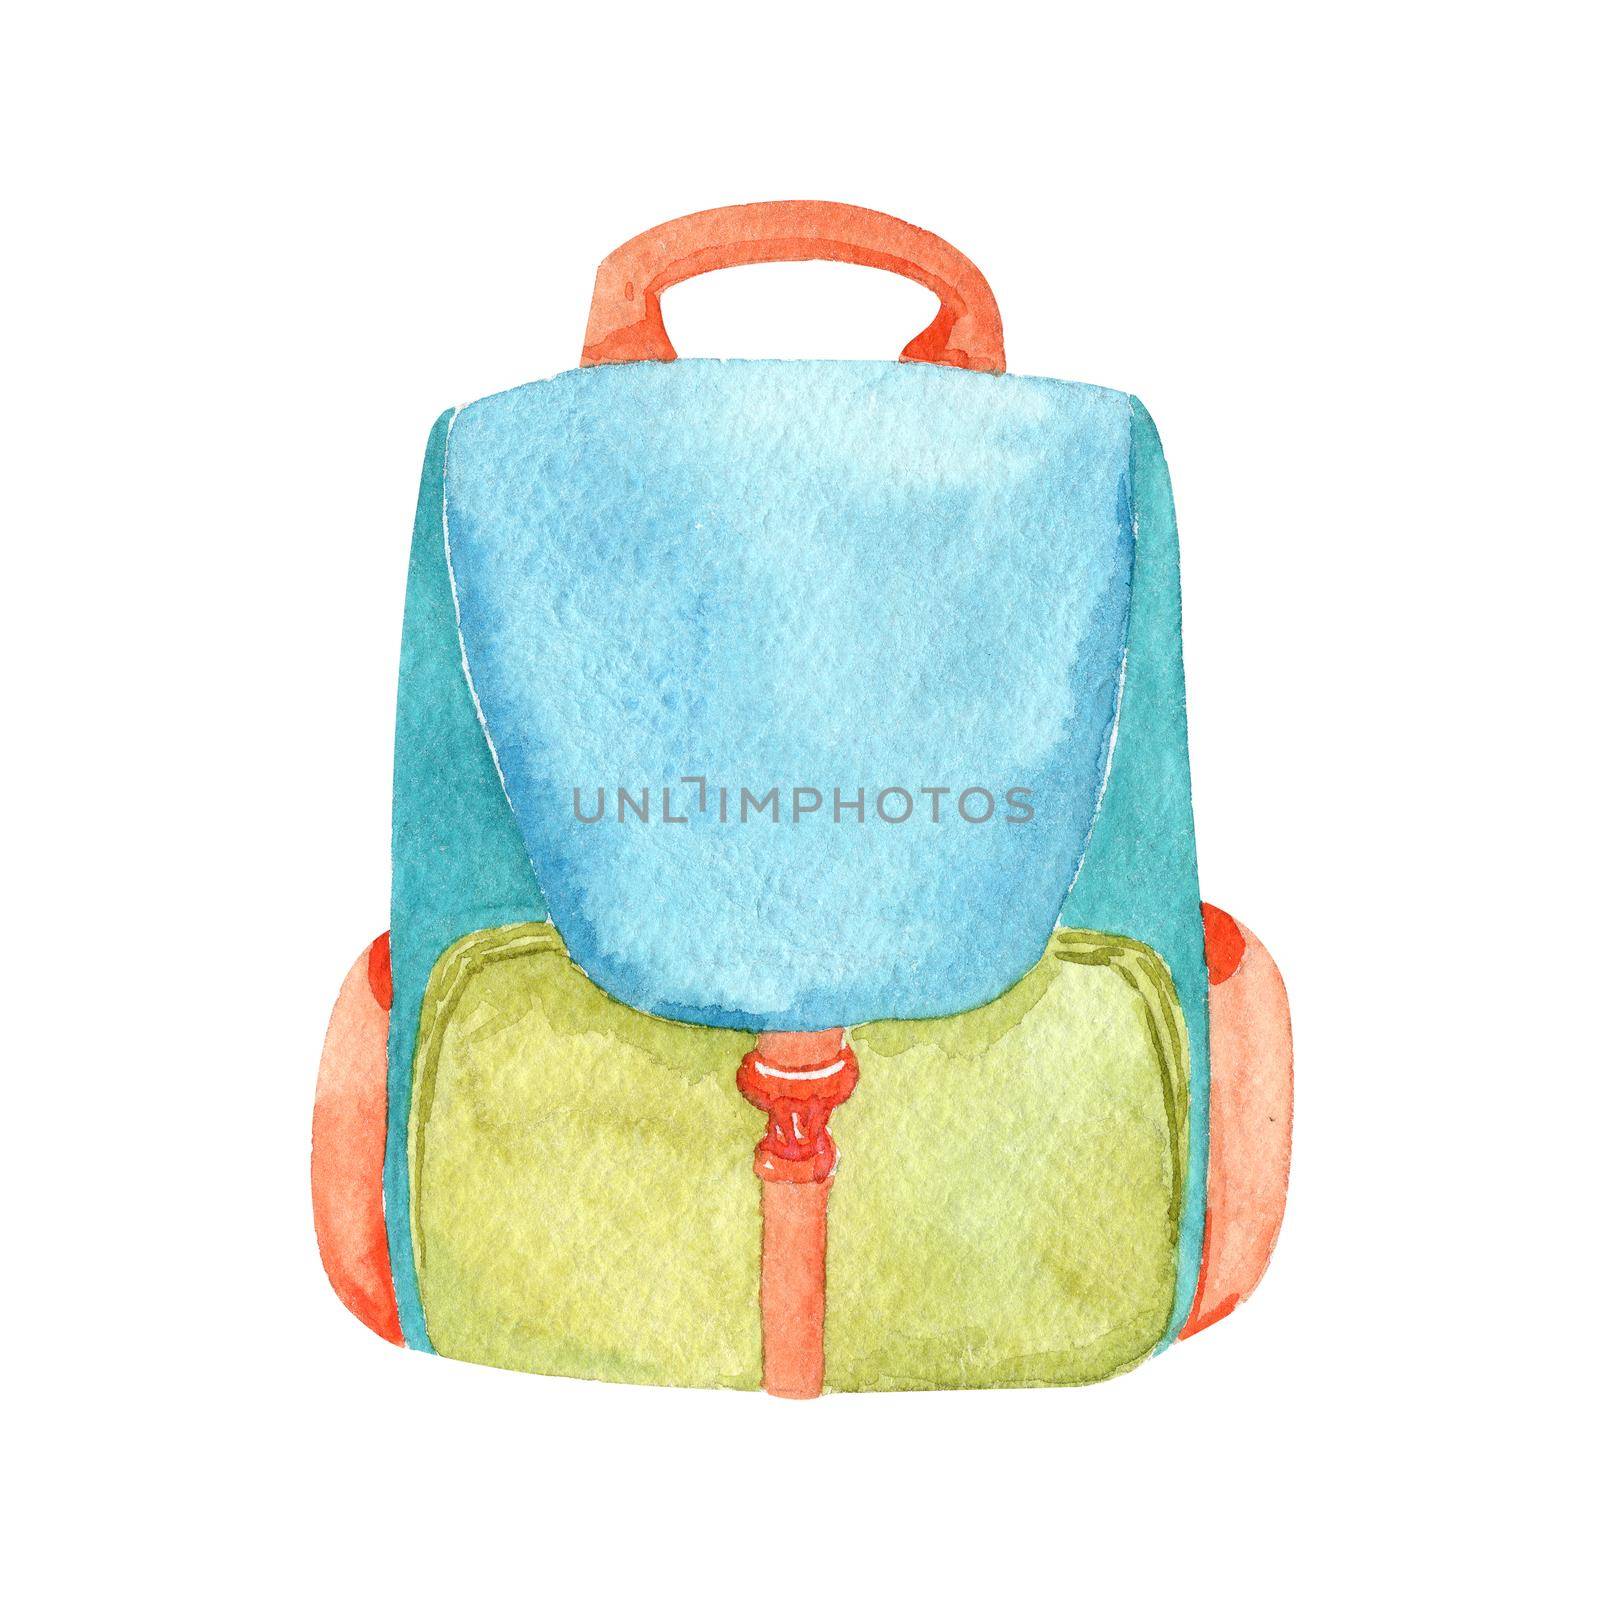 watercolor blue backpack isolated on white background. School bag. Travel bag